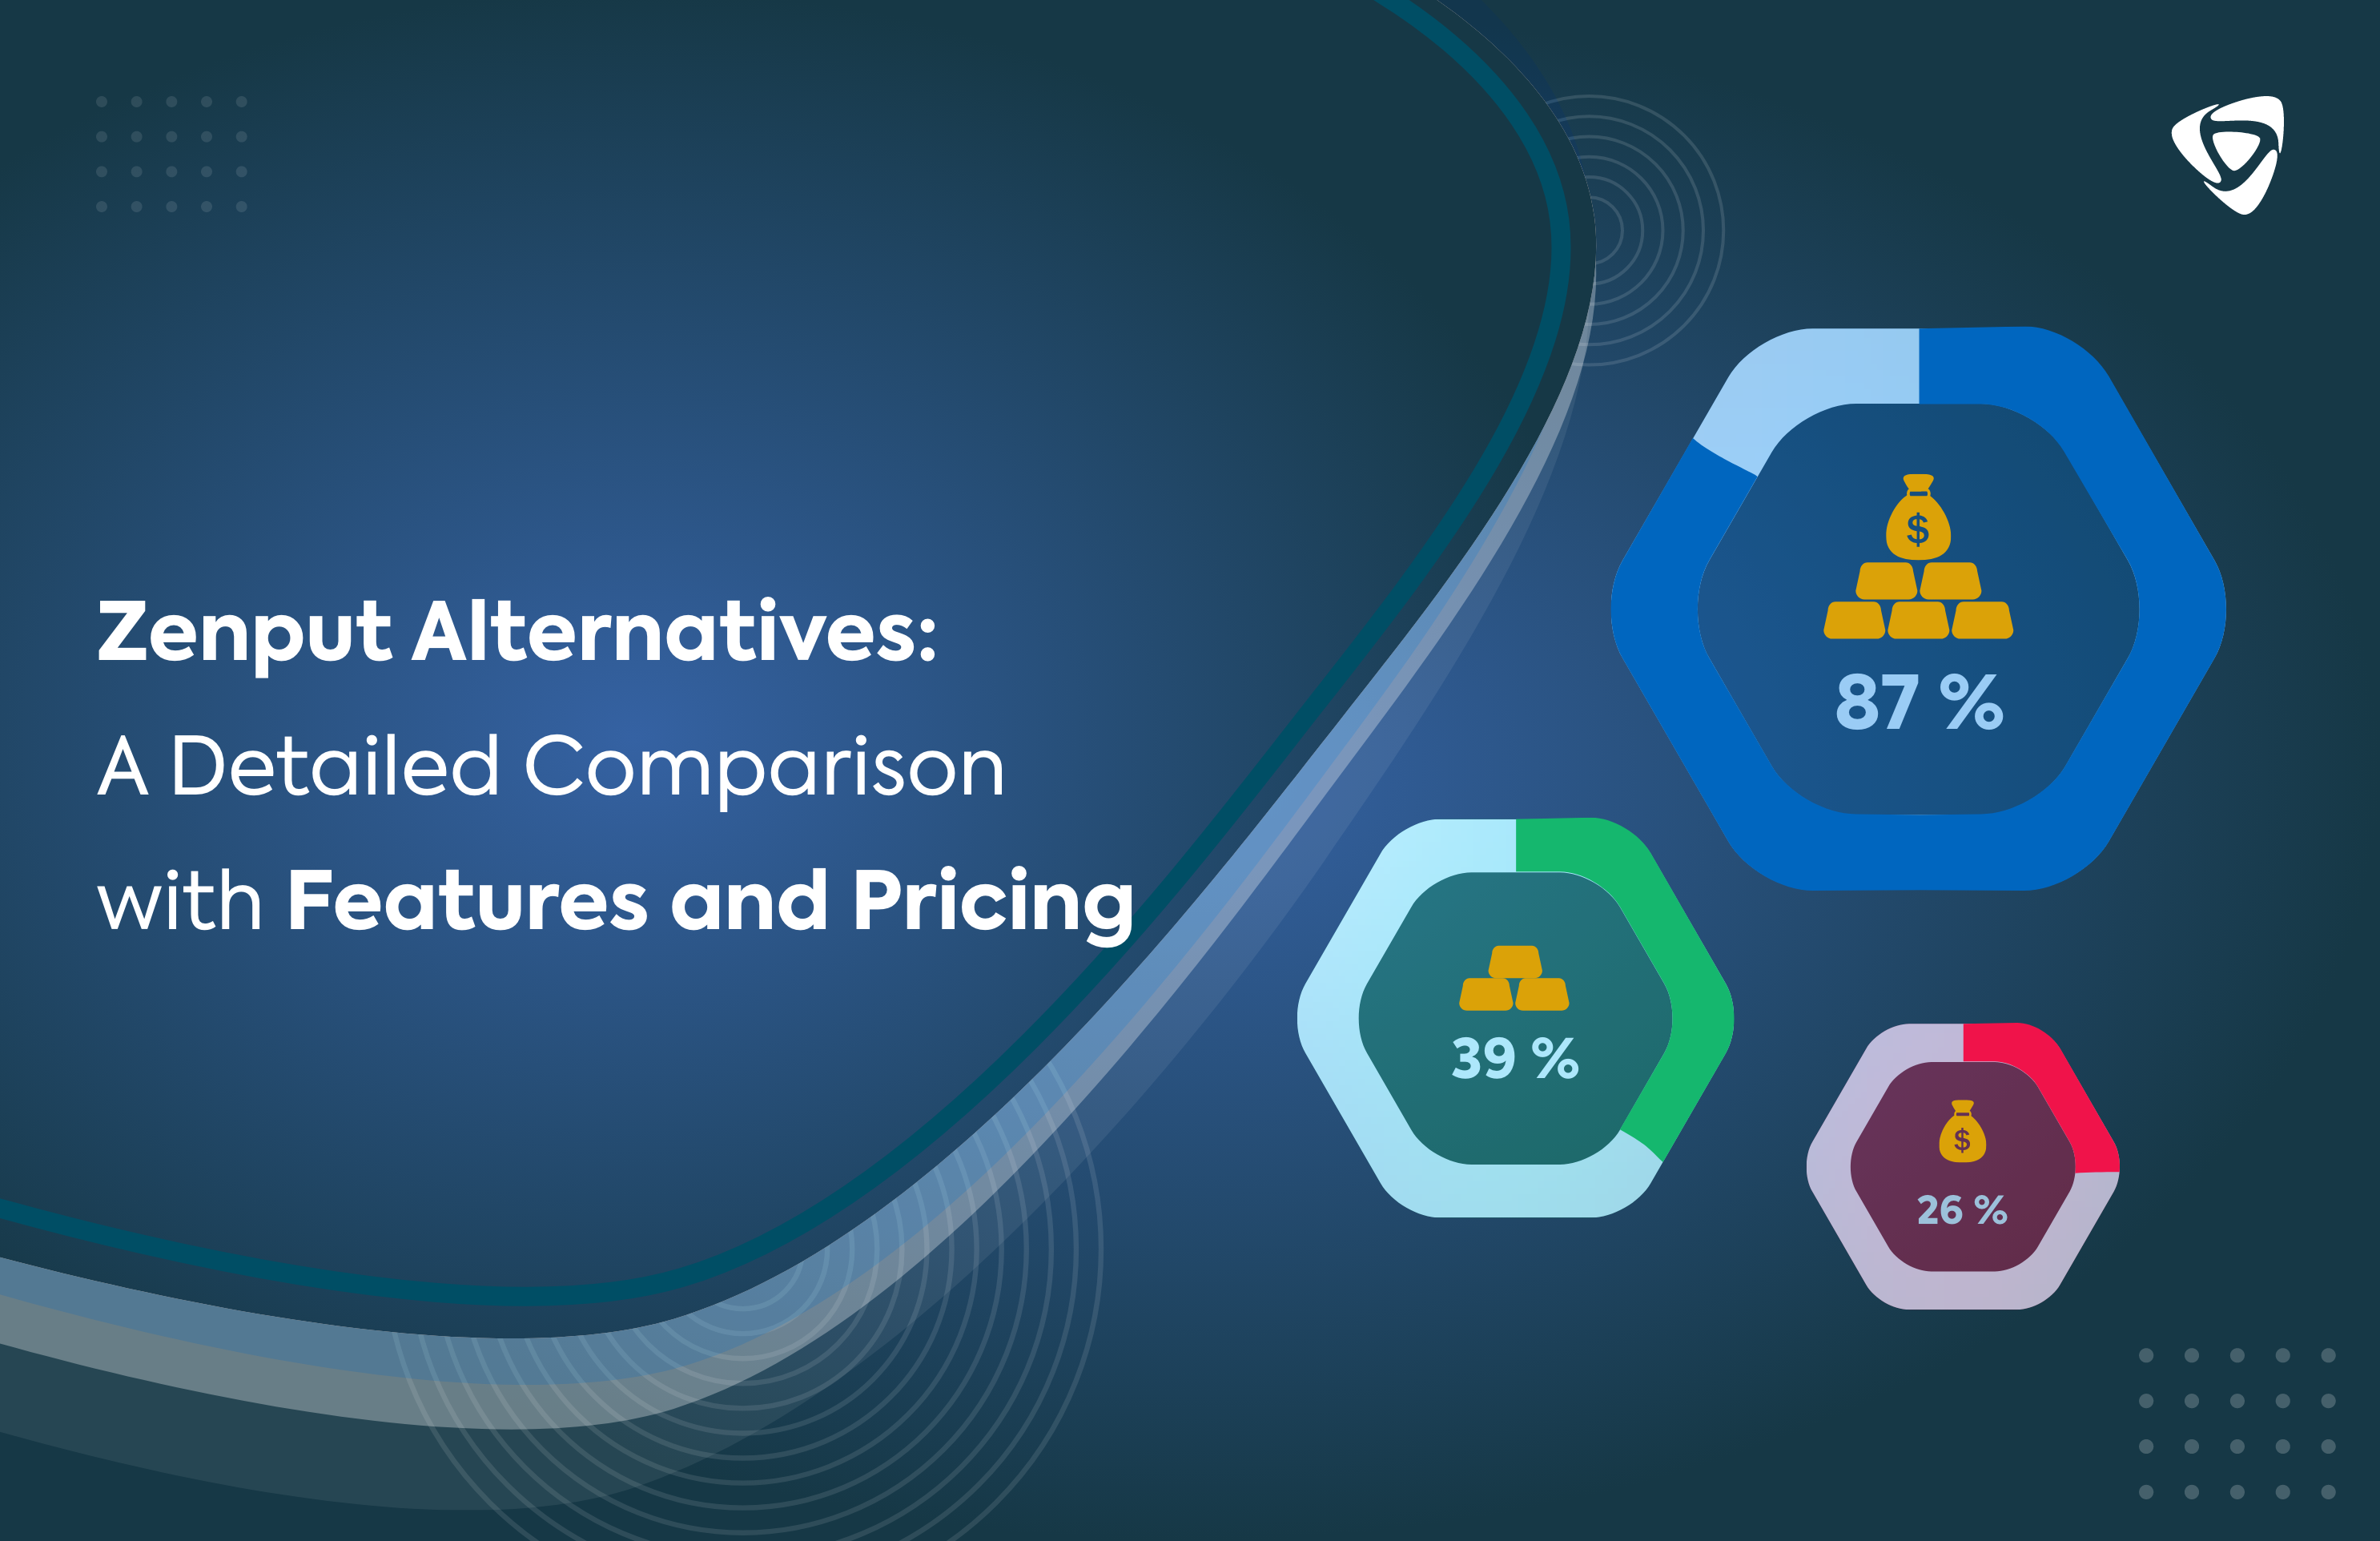 Zenput Alternatives: A Detailed Comparison with Features and Pricing